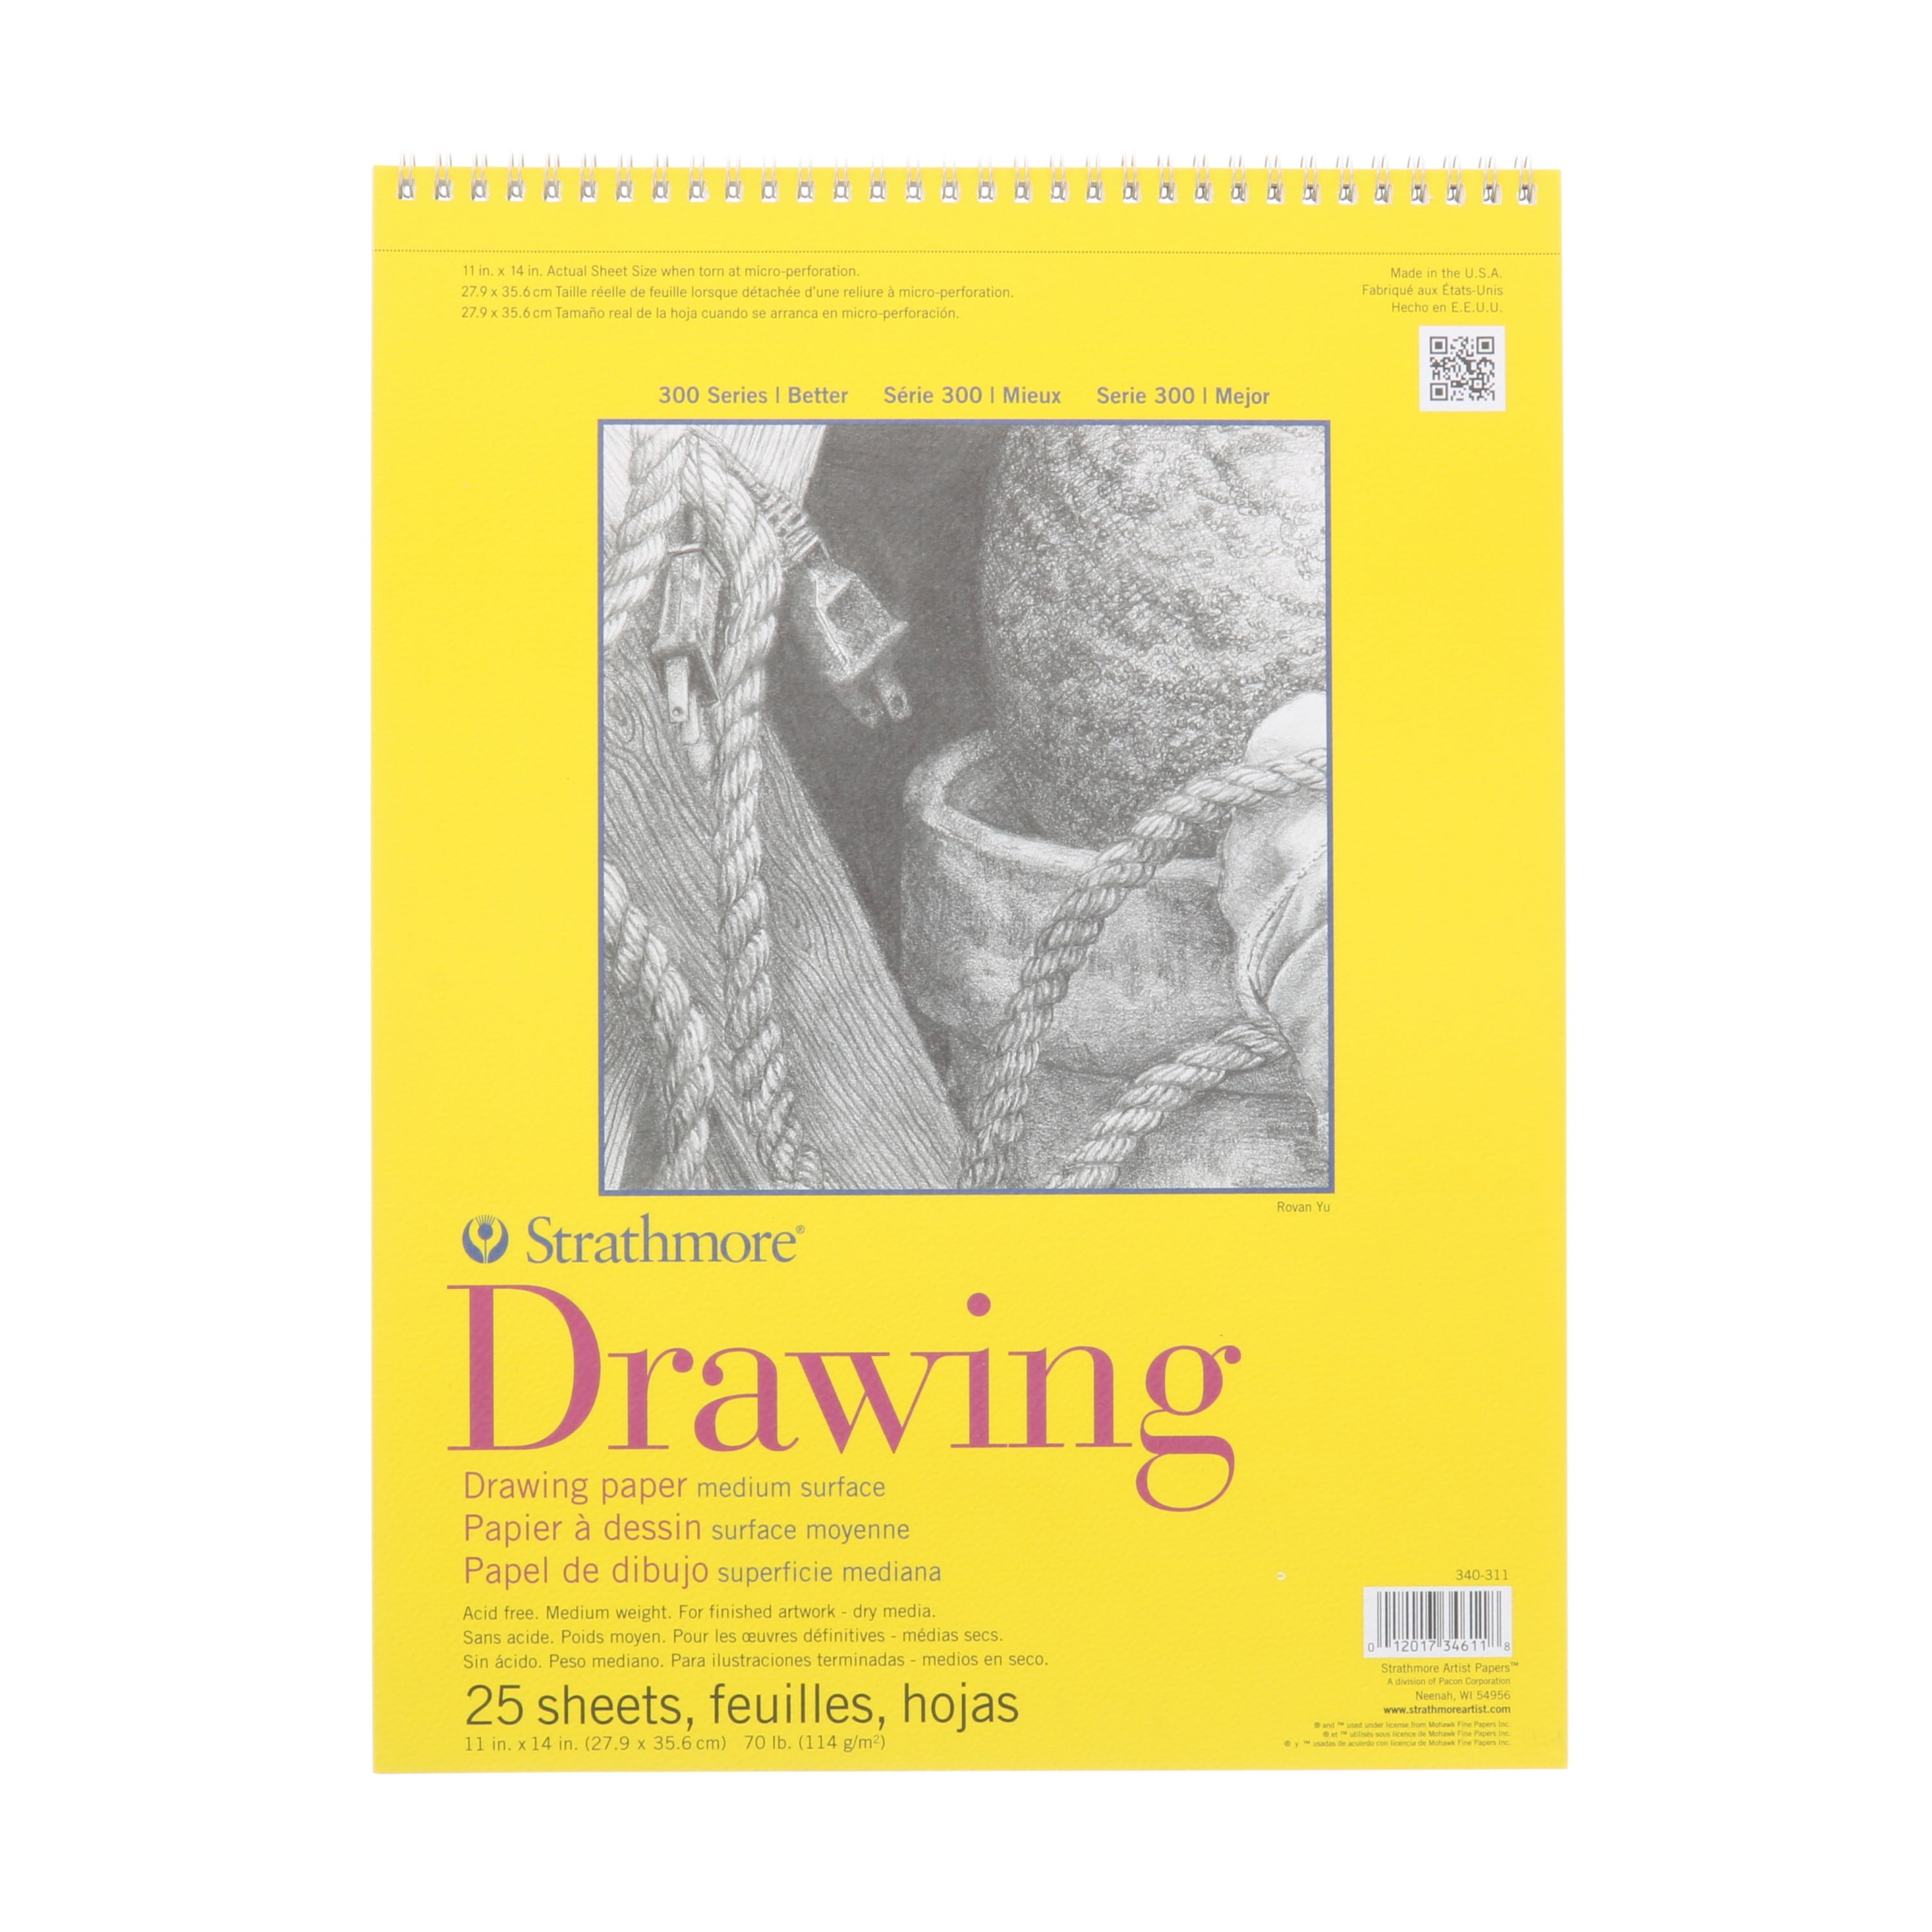 Strathmore Drawing Series 300 Drawing Pad DIN A3 114gsm 50 Sheets 